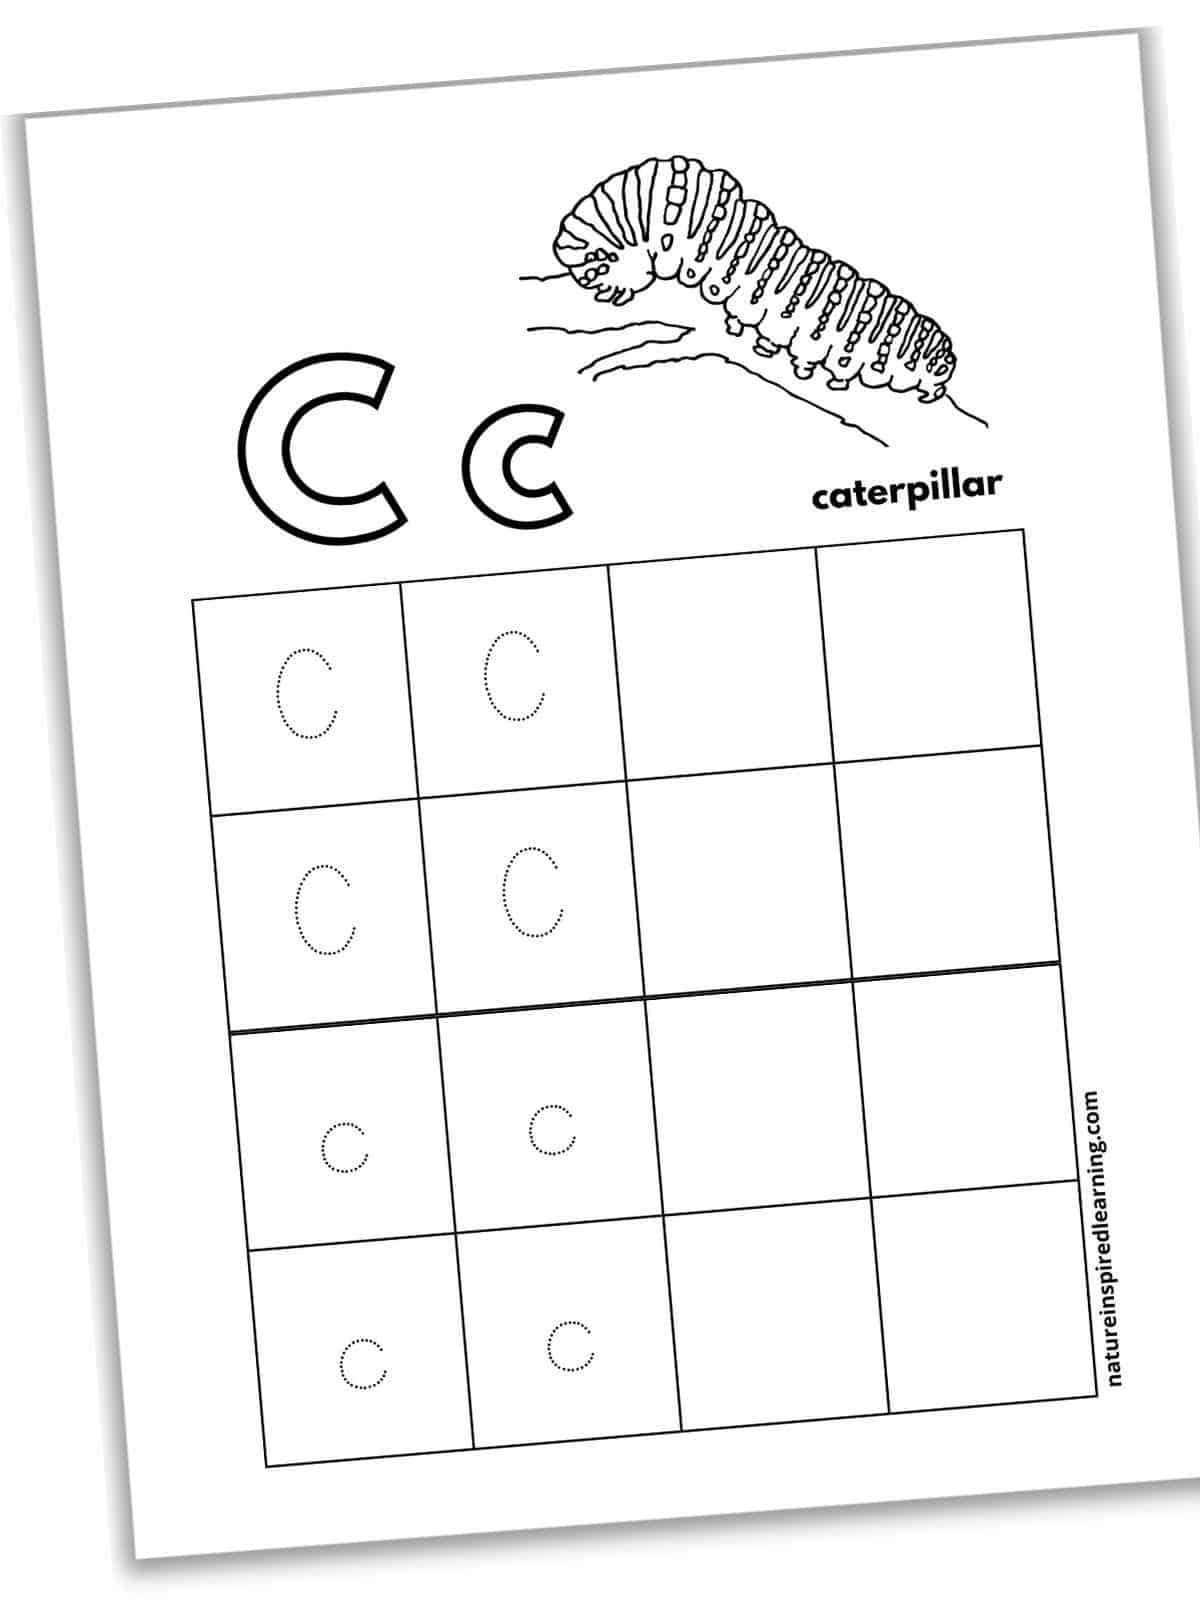 Printable worksheet with sixteen boxes, four with traceable letter C and four with lowercase c and a set of eight blank boxes. Bubble letter C and c across the top with a black and white image of a caterpillar on a stick with a label below. Worksheet slanted with a drop shadow.